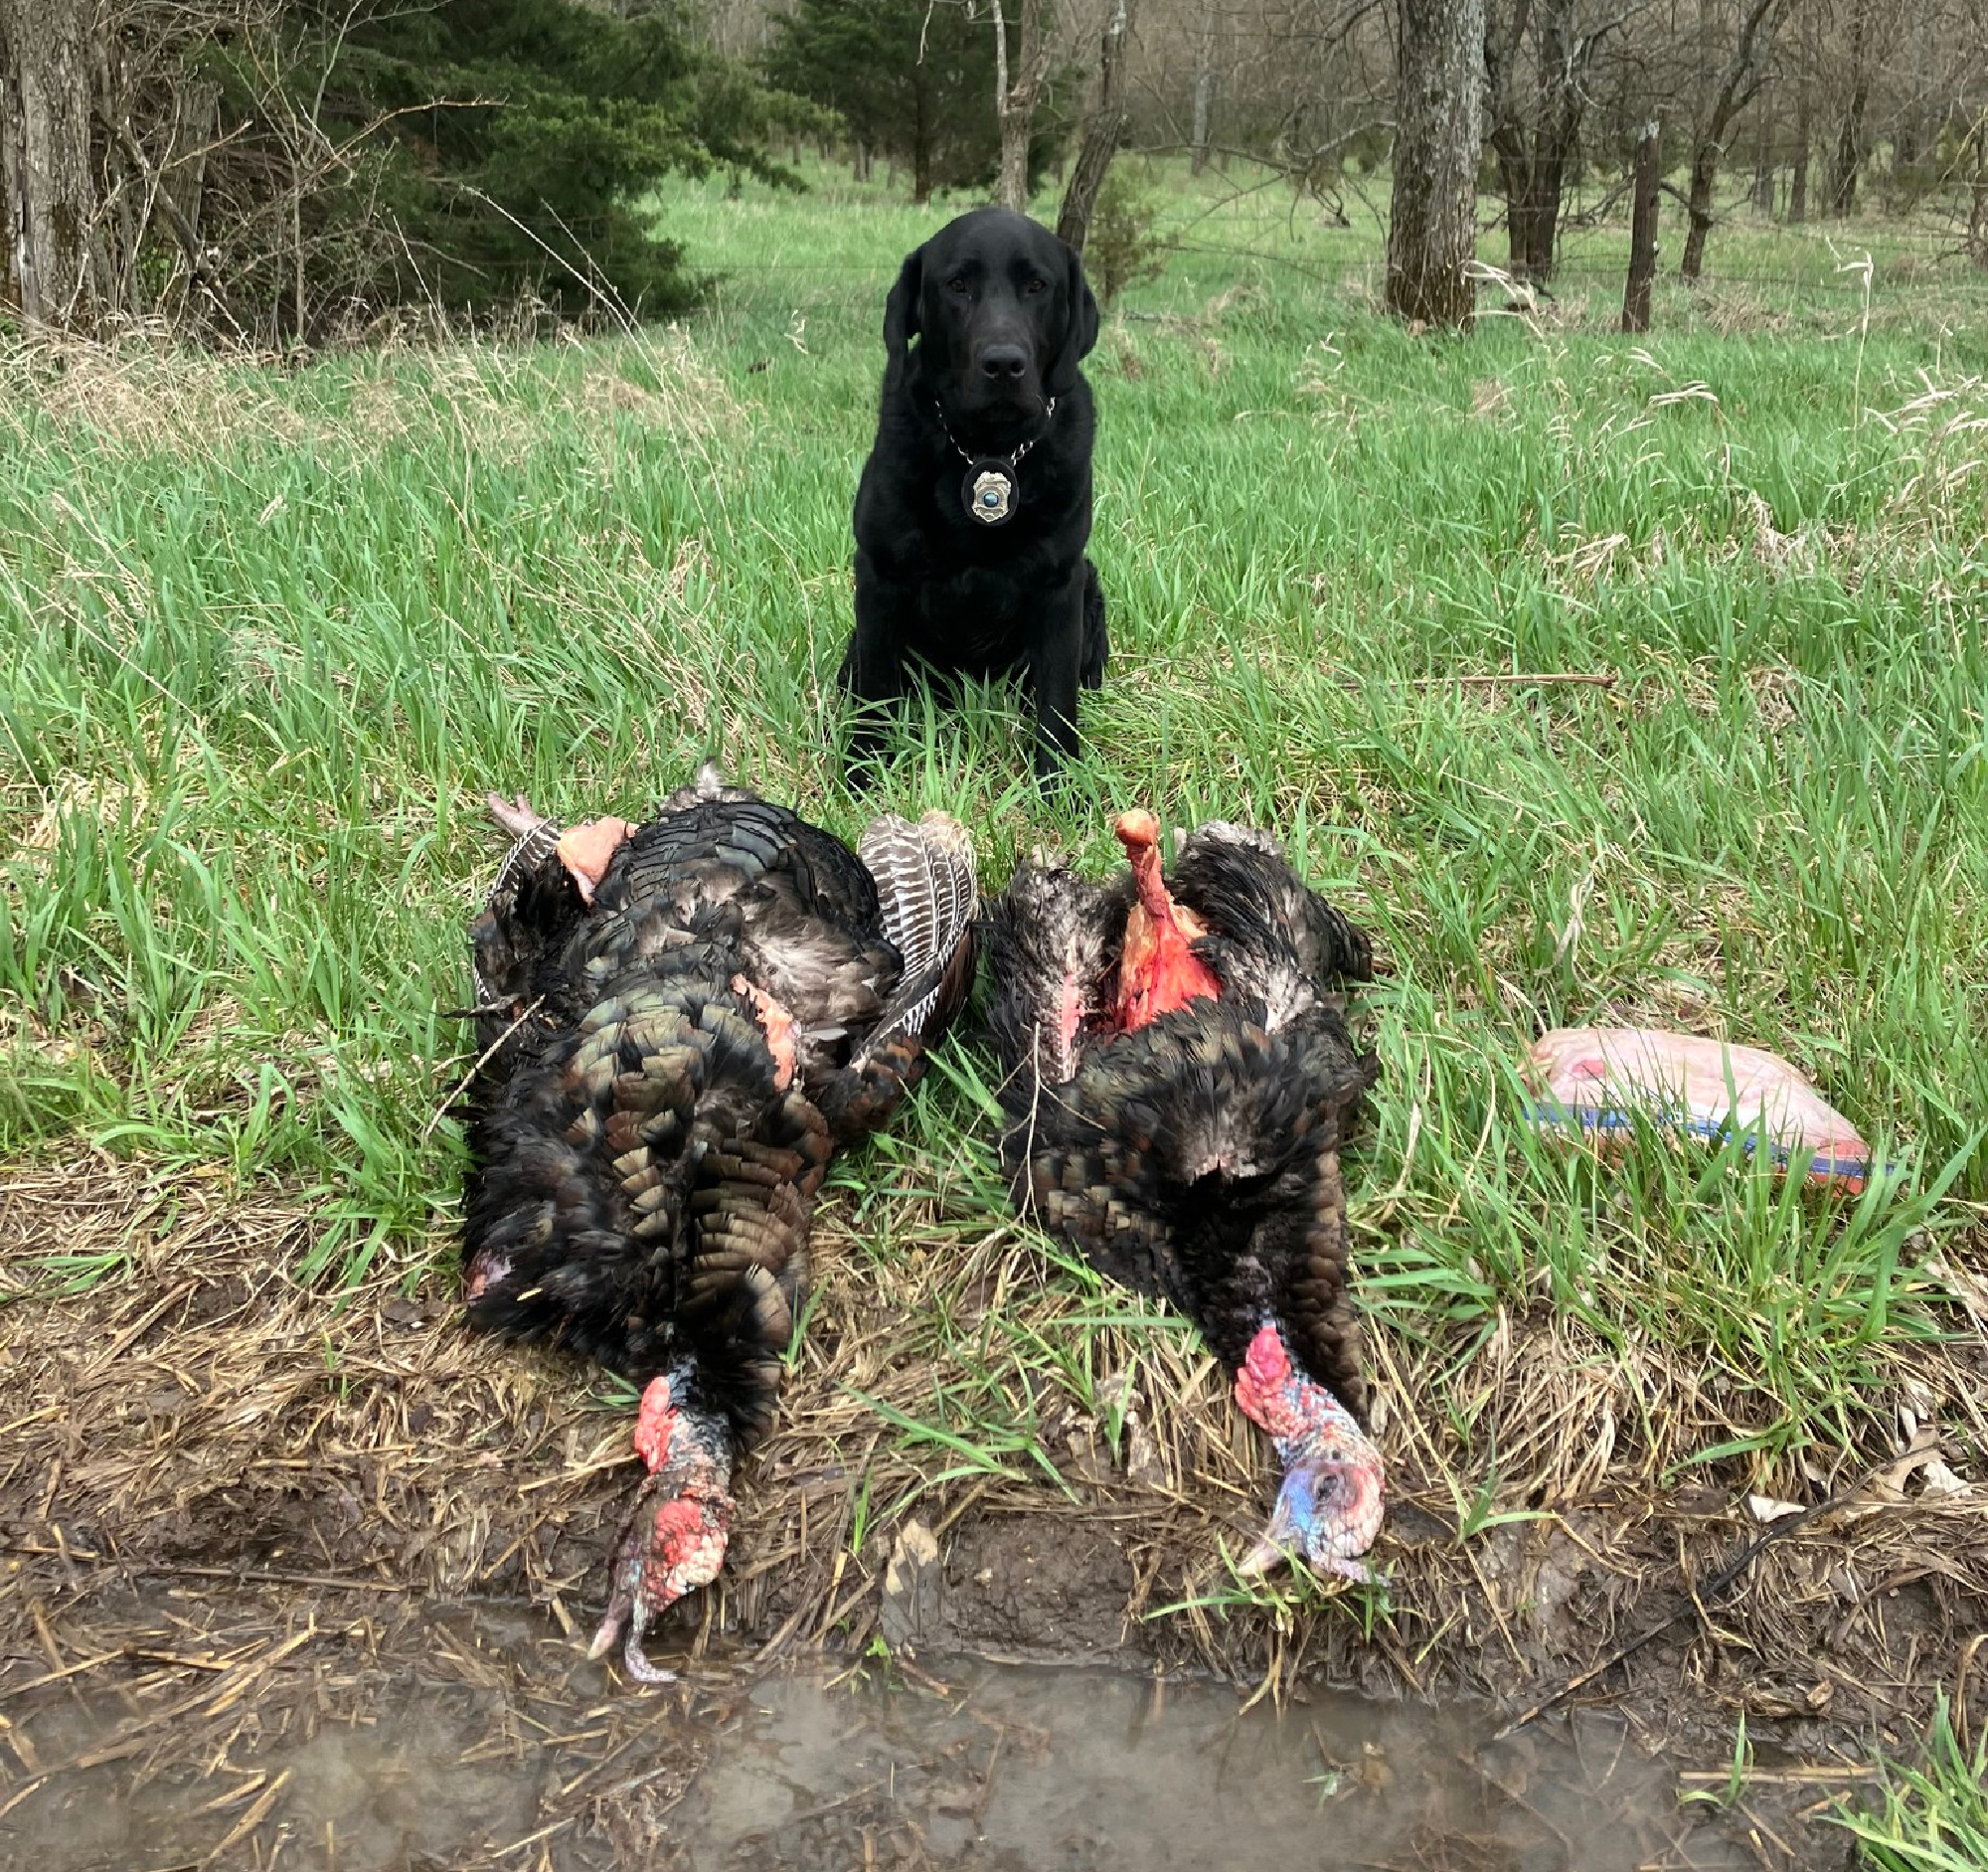 K9 Indy with two more poached turkeys.